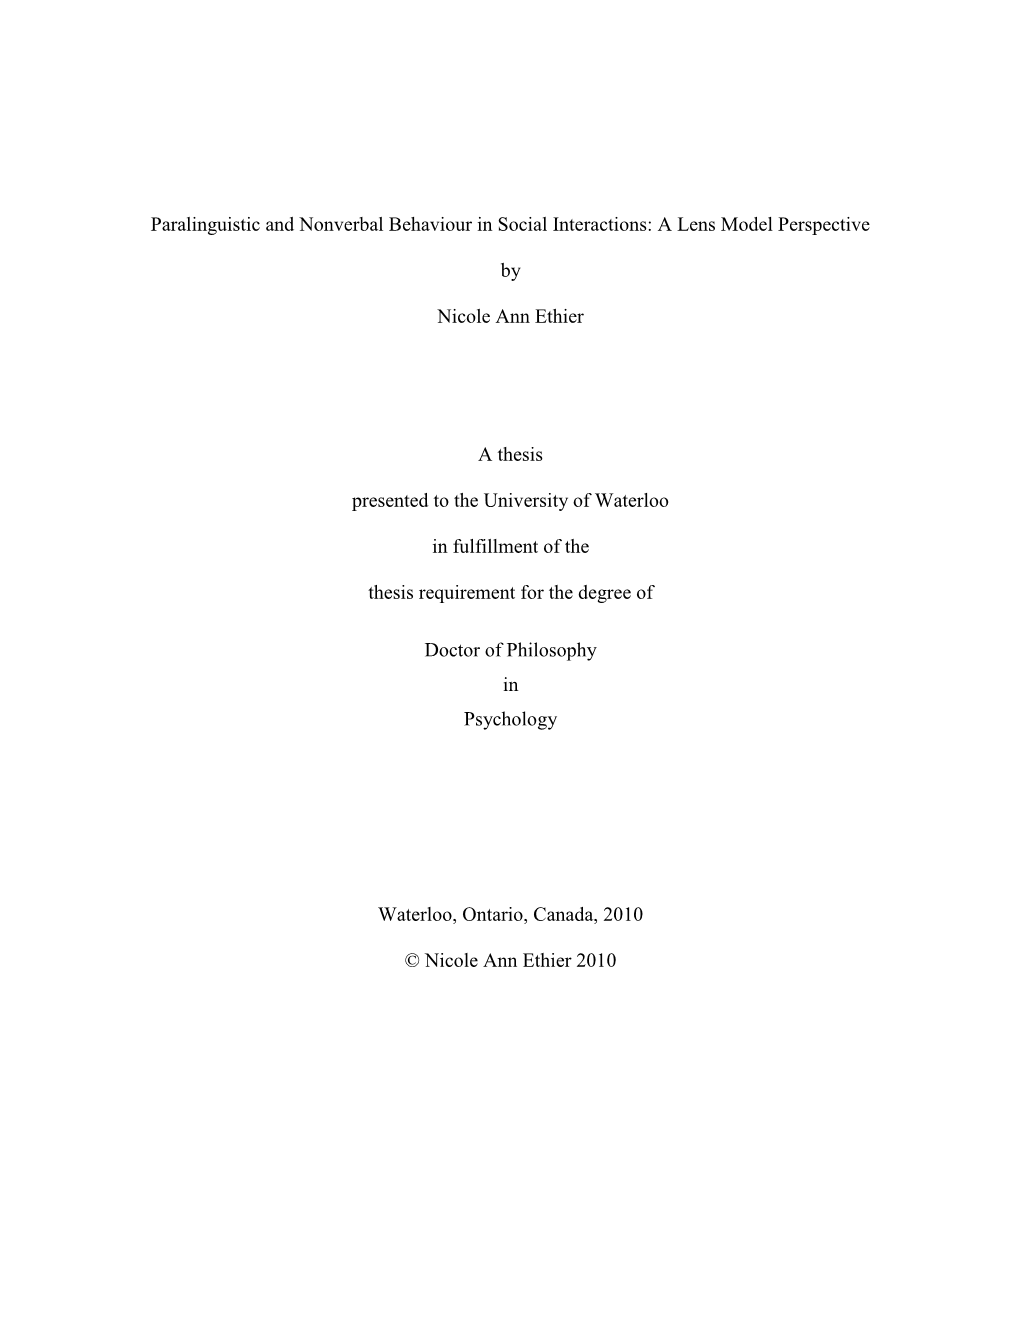 Paralinguistic and Nonverbal Behaviour in Social Interactions: a Lens Model Perspective